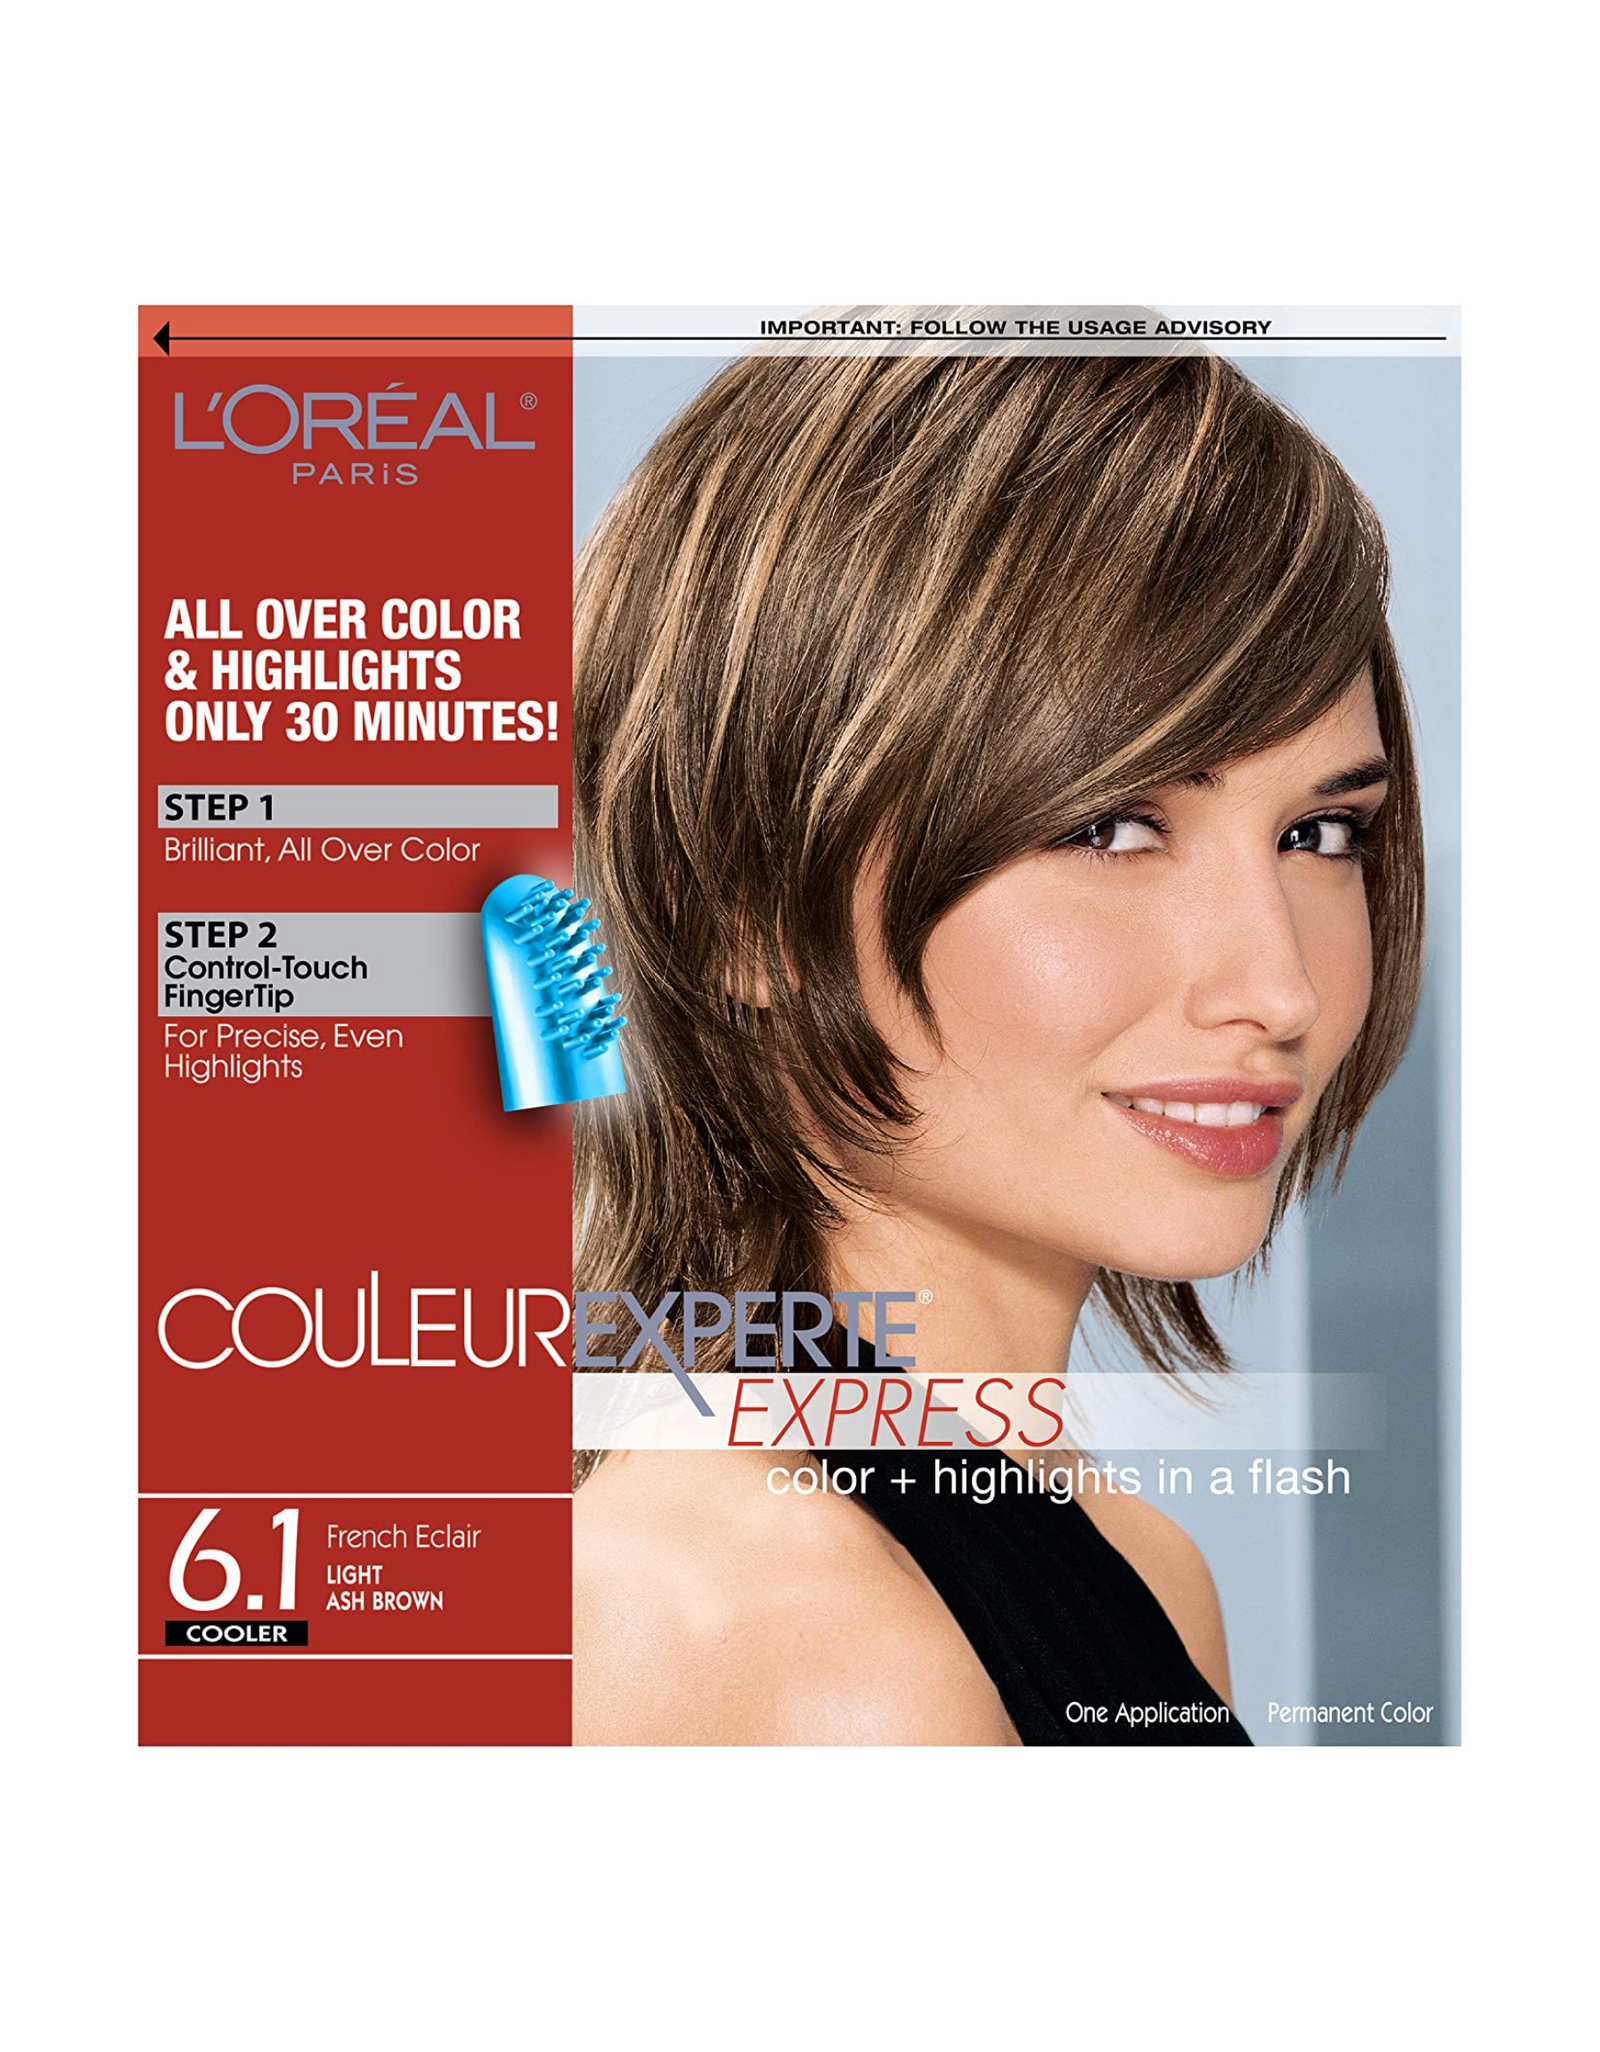 L'Oreal Paris Couleur Experte Express - Hair Color and Highlights Kit, French Éclair